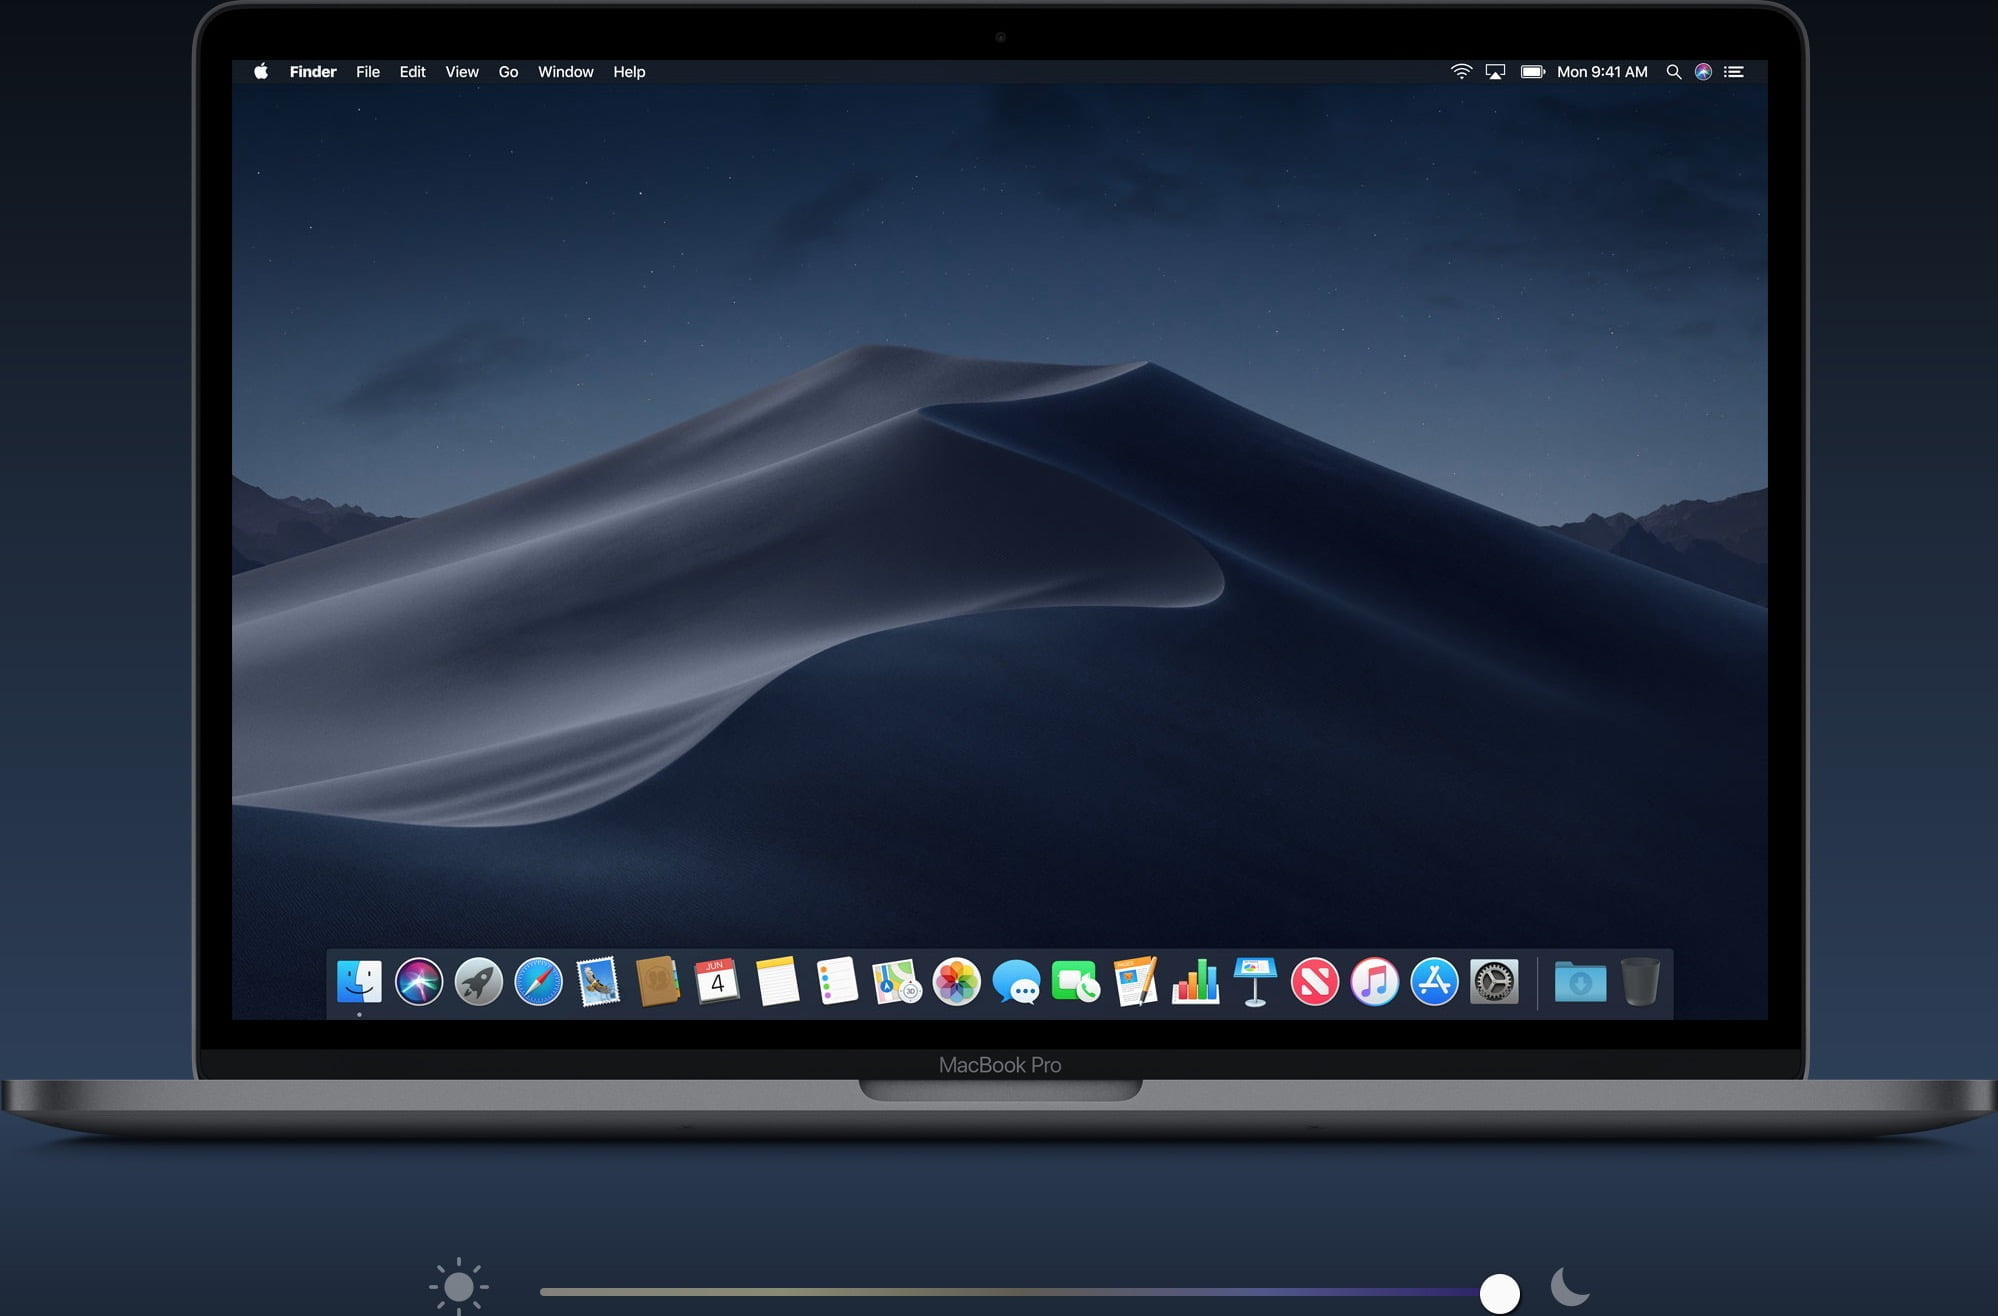 imovie for mojave 10.14 6 download